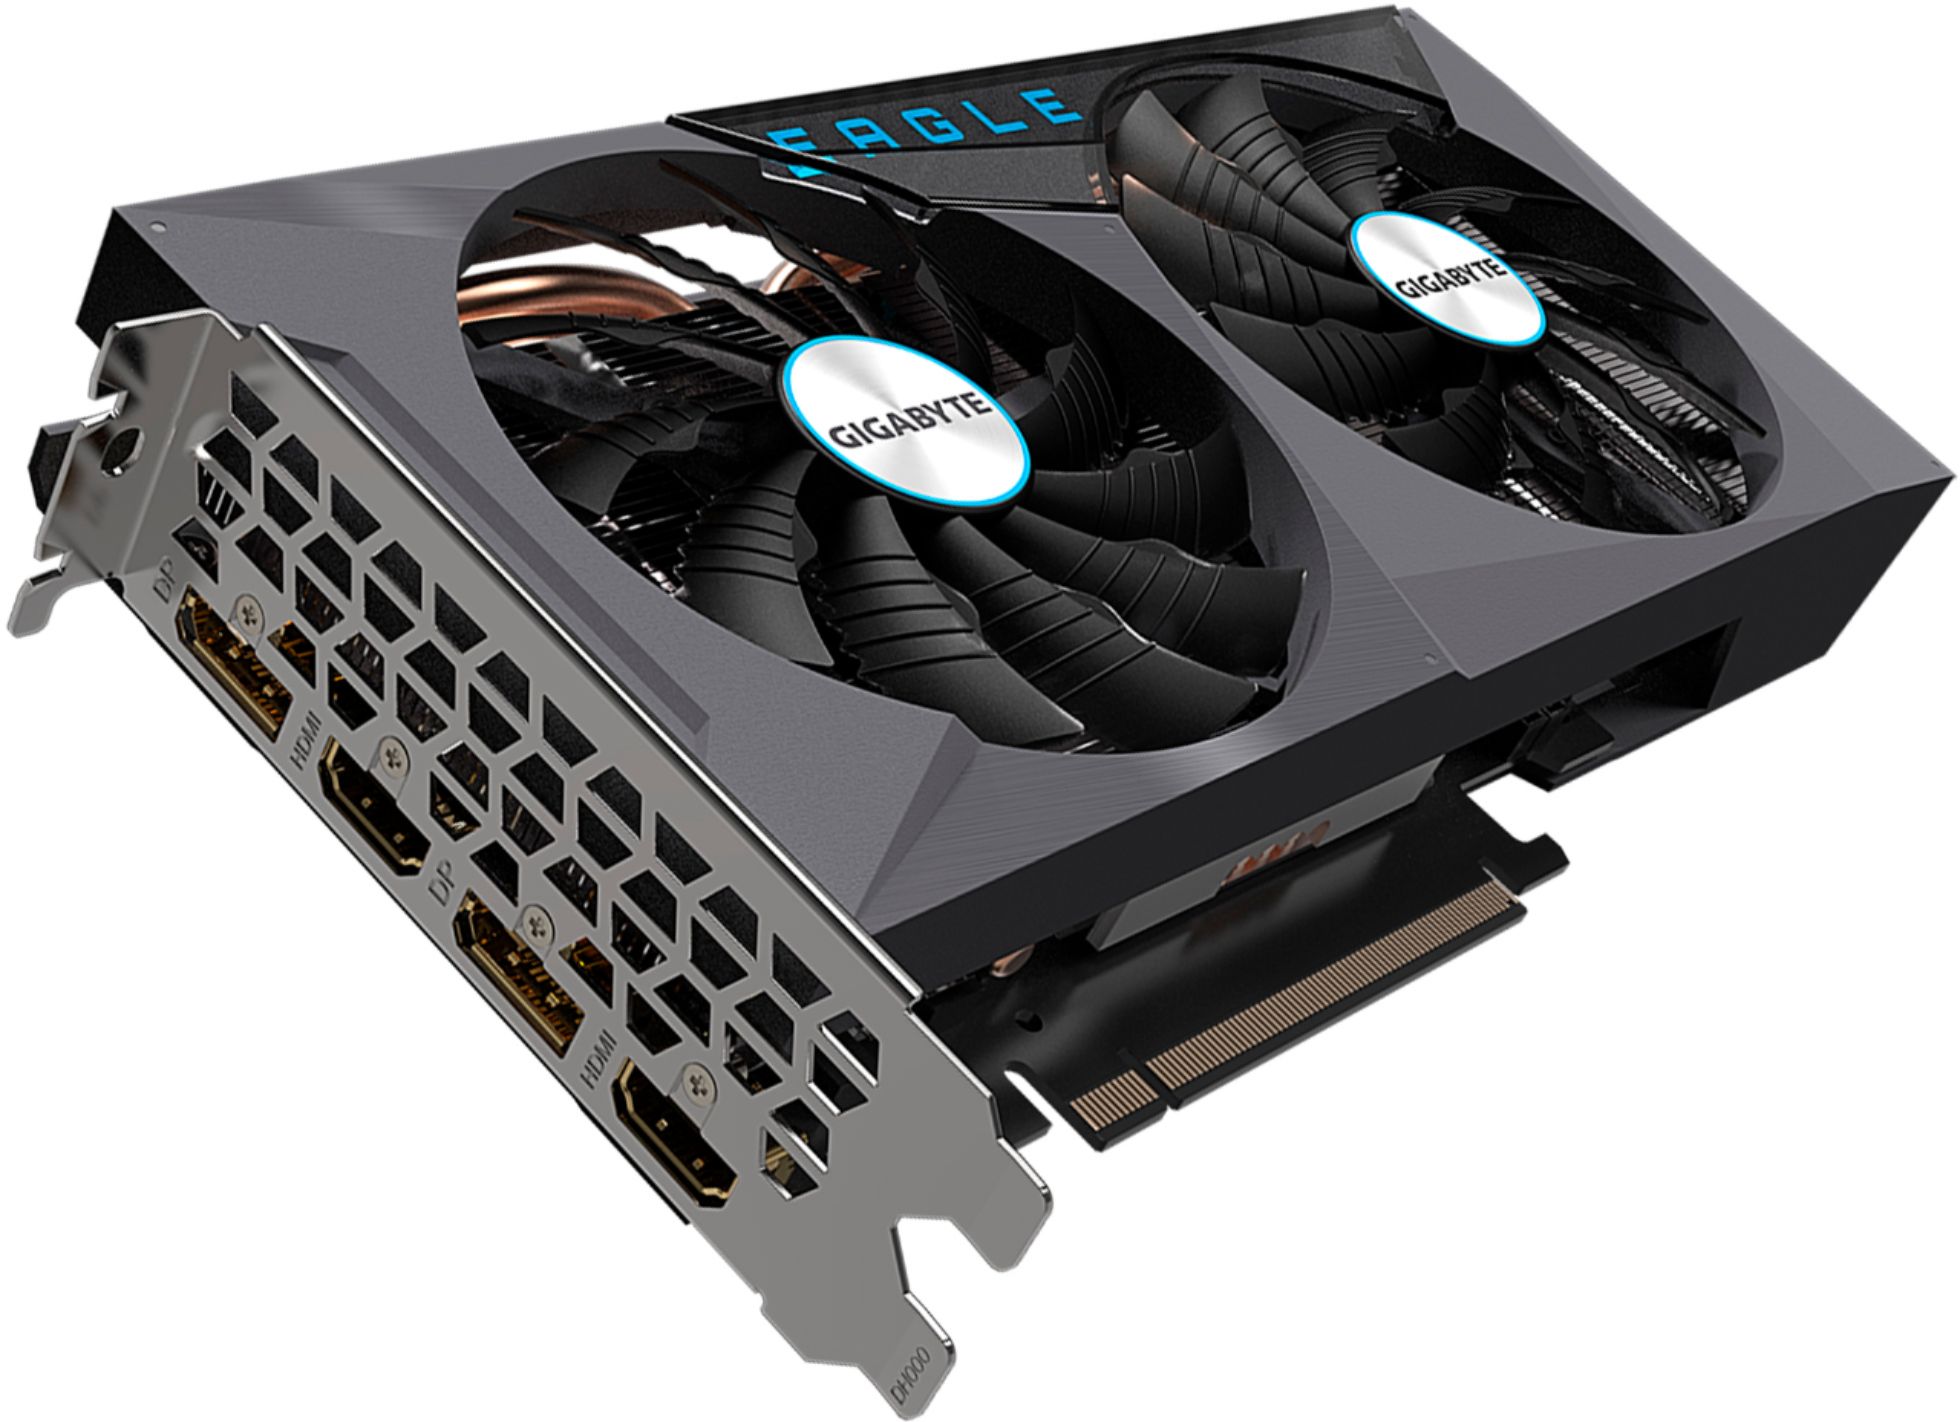 Launching This Week: NVIDIA's GeForce RTX 3060 Ti, A Smaller Bite